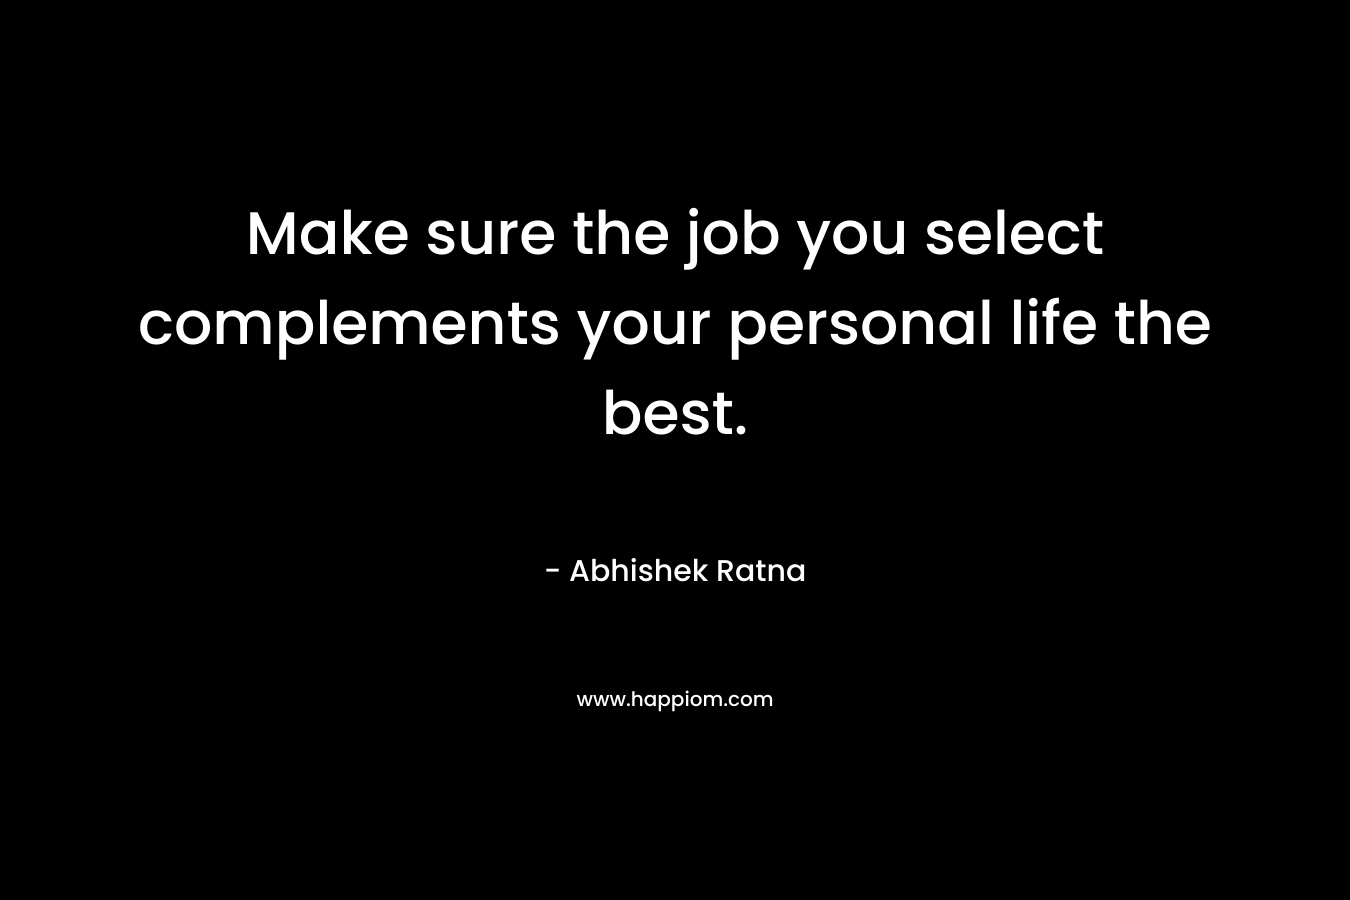 Make sure the job you select complements your personal life the best. – Abhishek Ratna